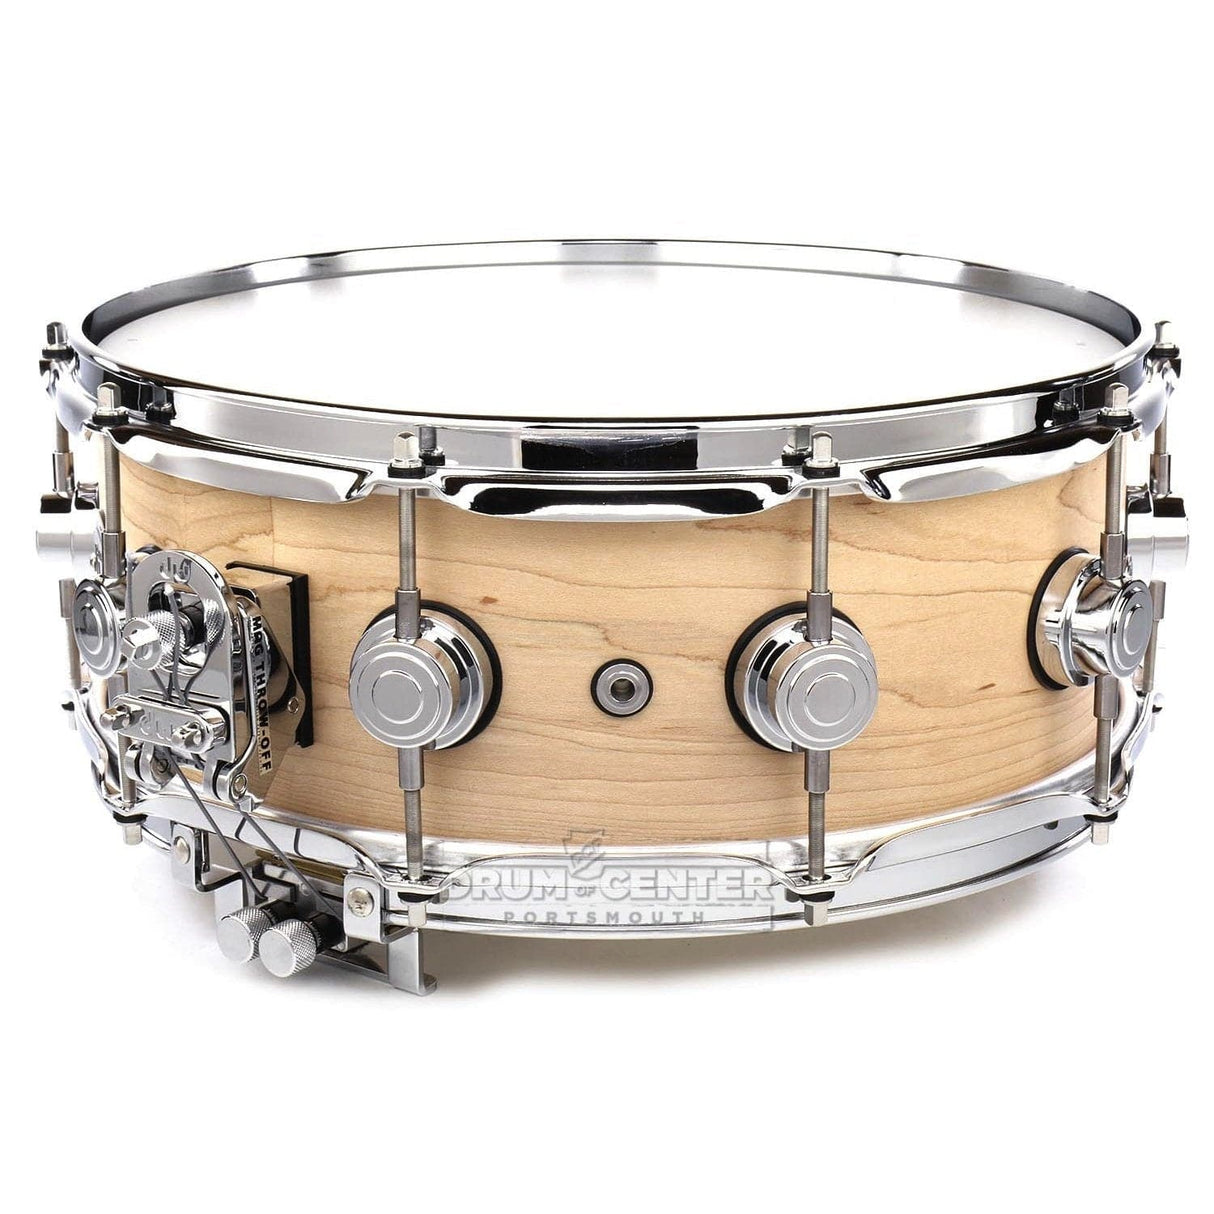 DW Collectors Super Sonic Solid Ply Snare Drum 14x5.5 Natural Satin